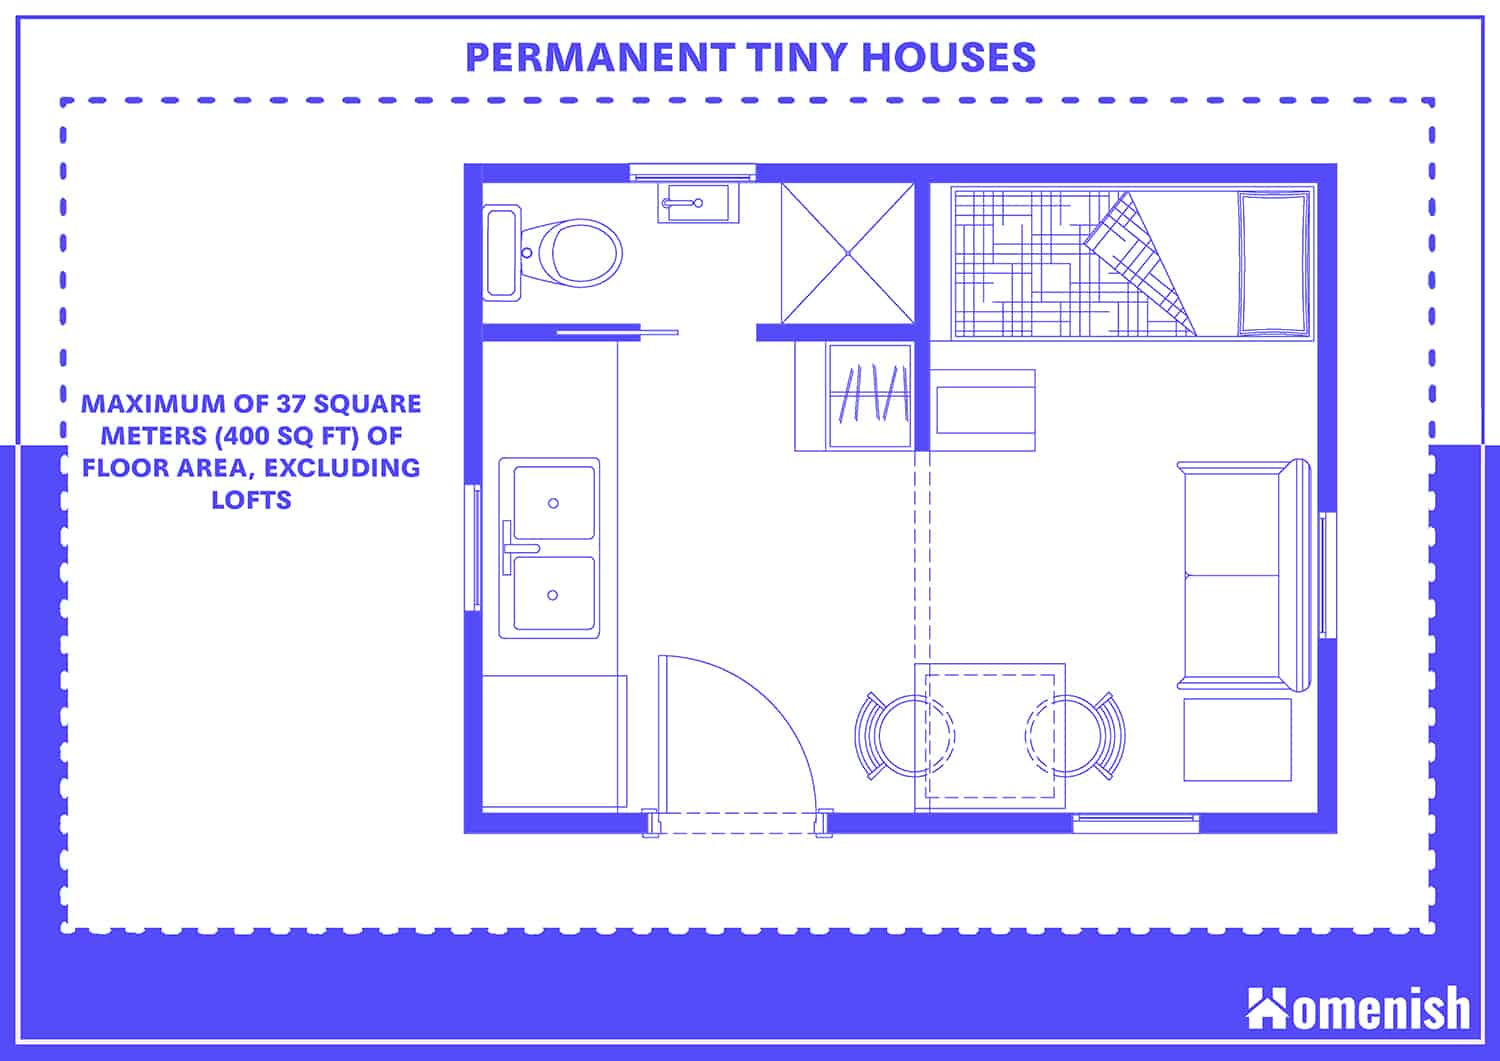 Permanent Tiny House Dimensions